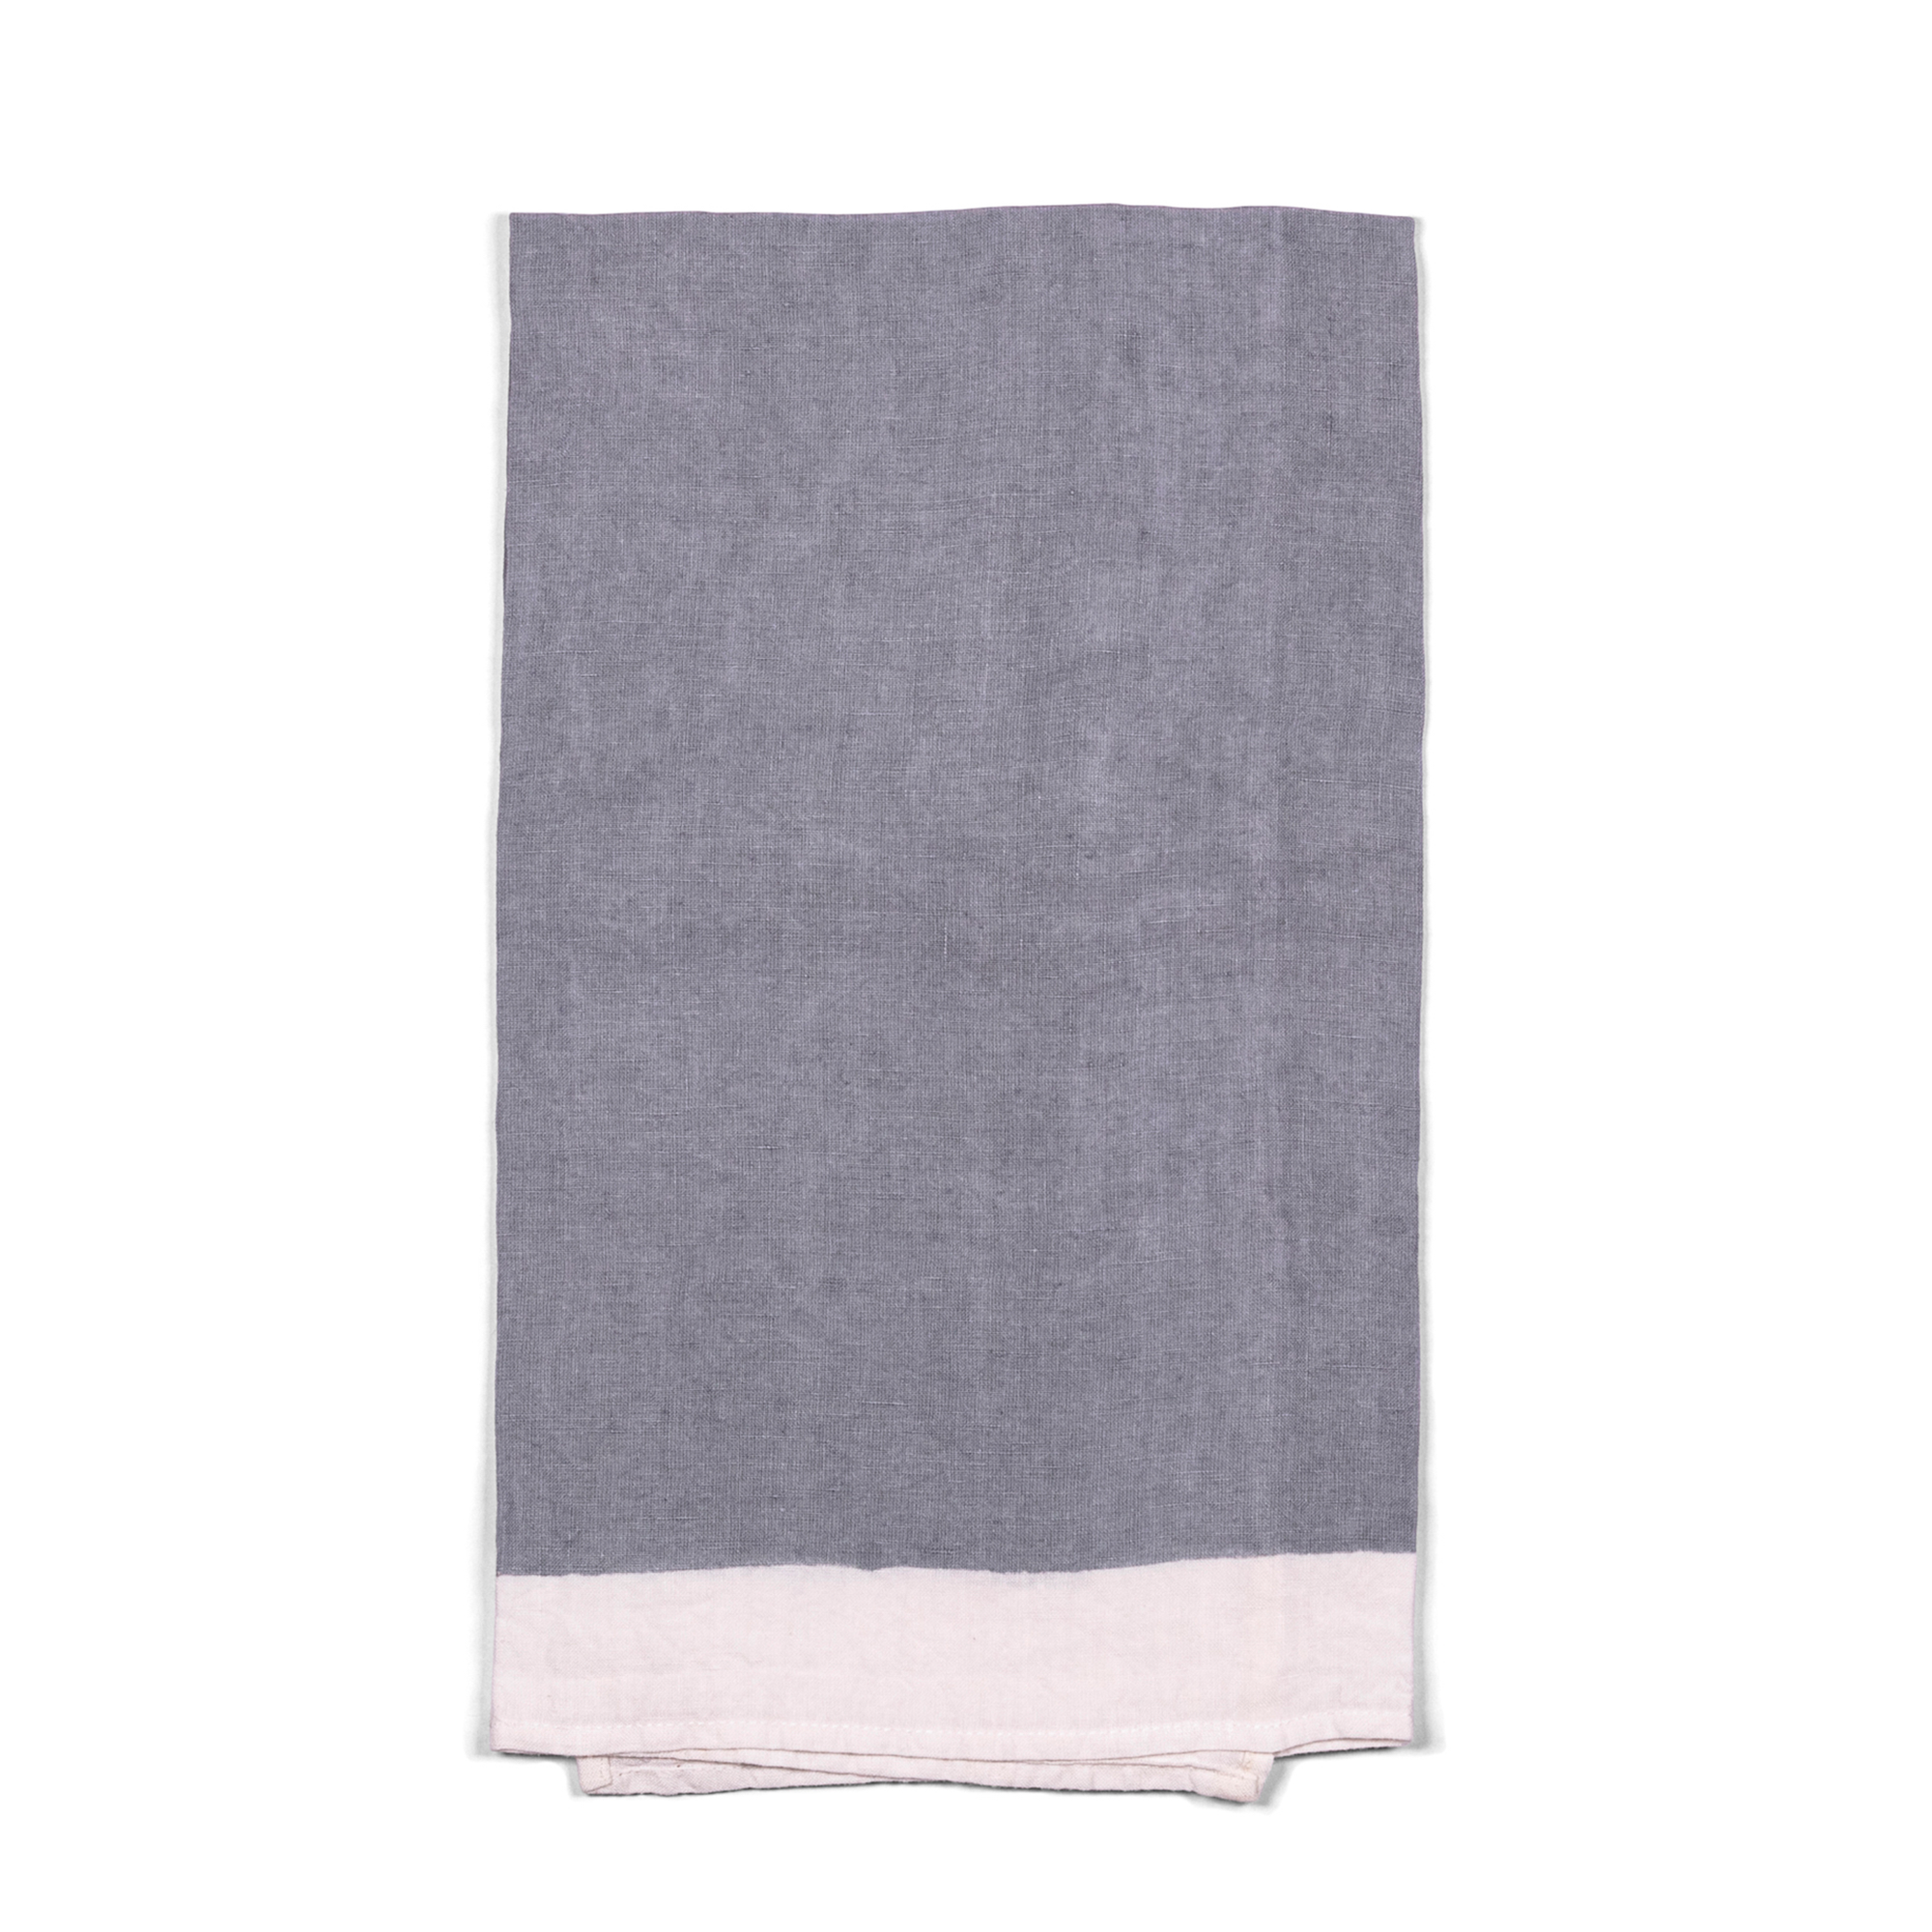 A stylish grey linen tea towel with white borders, handmade using pear wood.  Can be used in kitchen, for breakfast, formal dining, or garden tablescape.